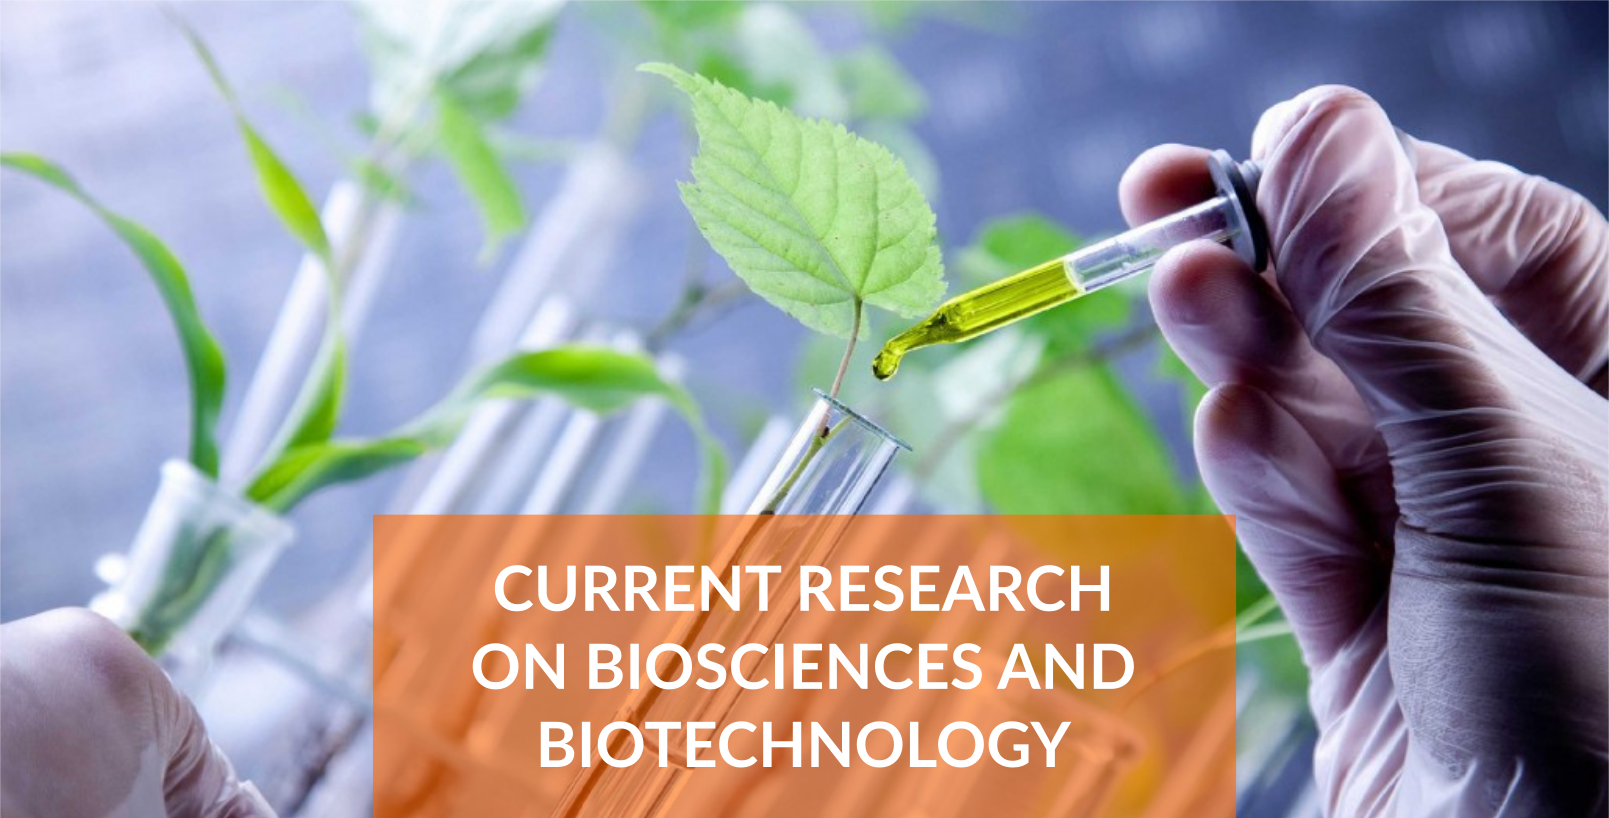 current research in biotechnology exploring the biotech forefront